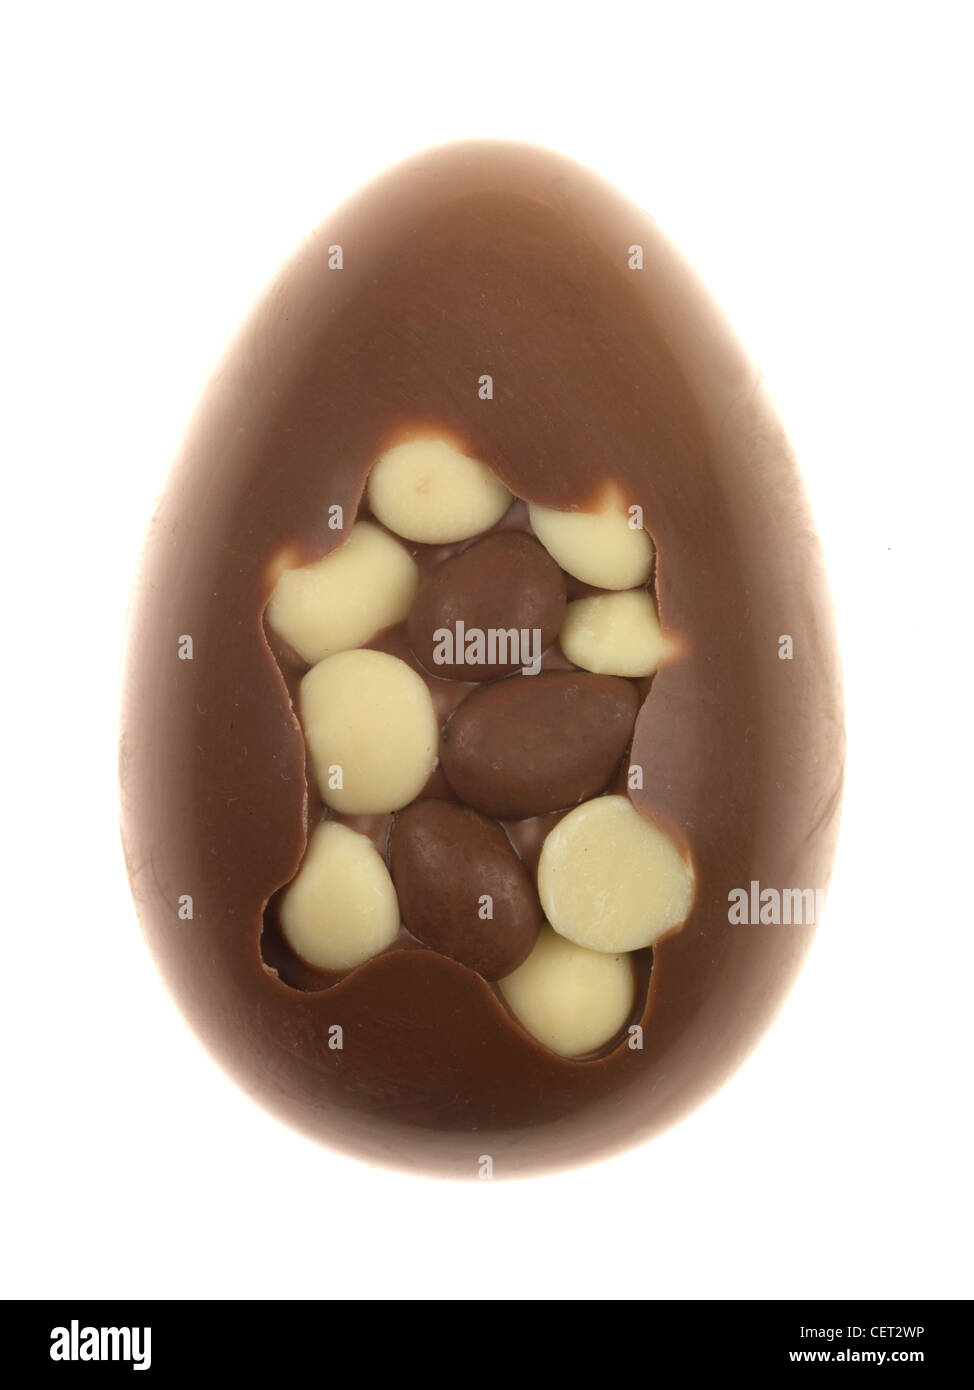 Traditional Luxury Novelty Chocolate Easter Egg Confectionery, Isolated Against White Background, With Clipping Path And No People, Ready To Eat Stock Photo